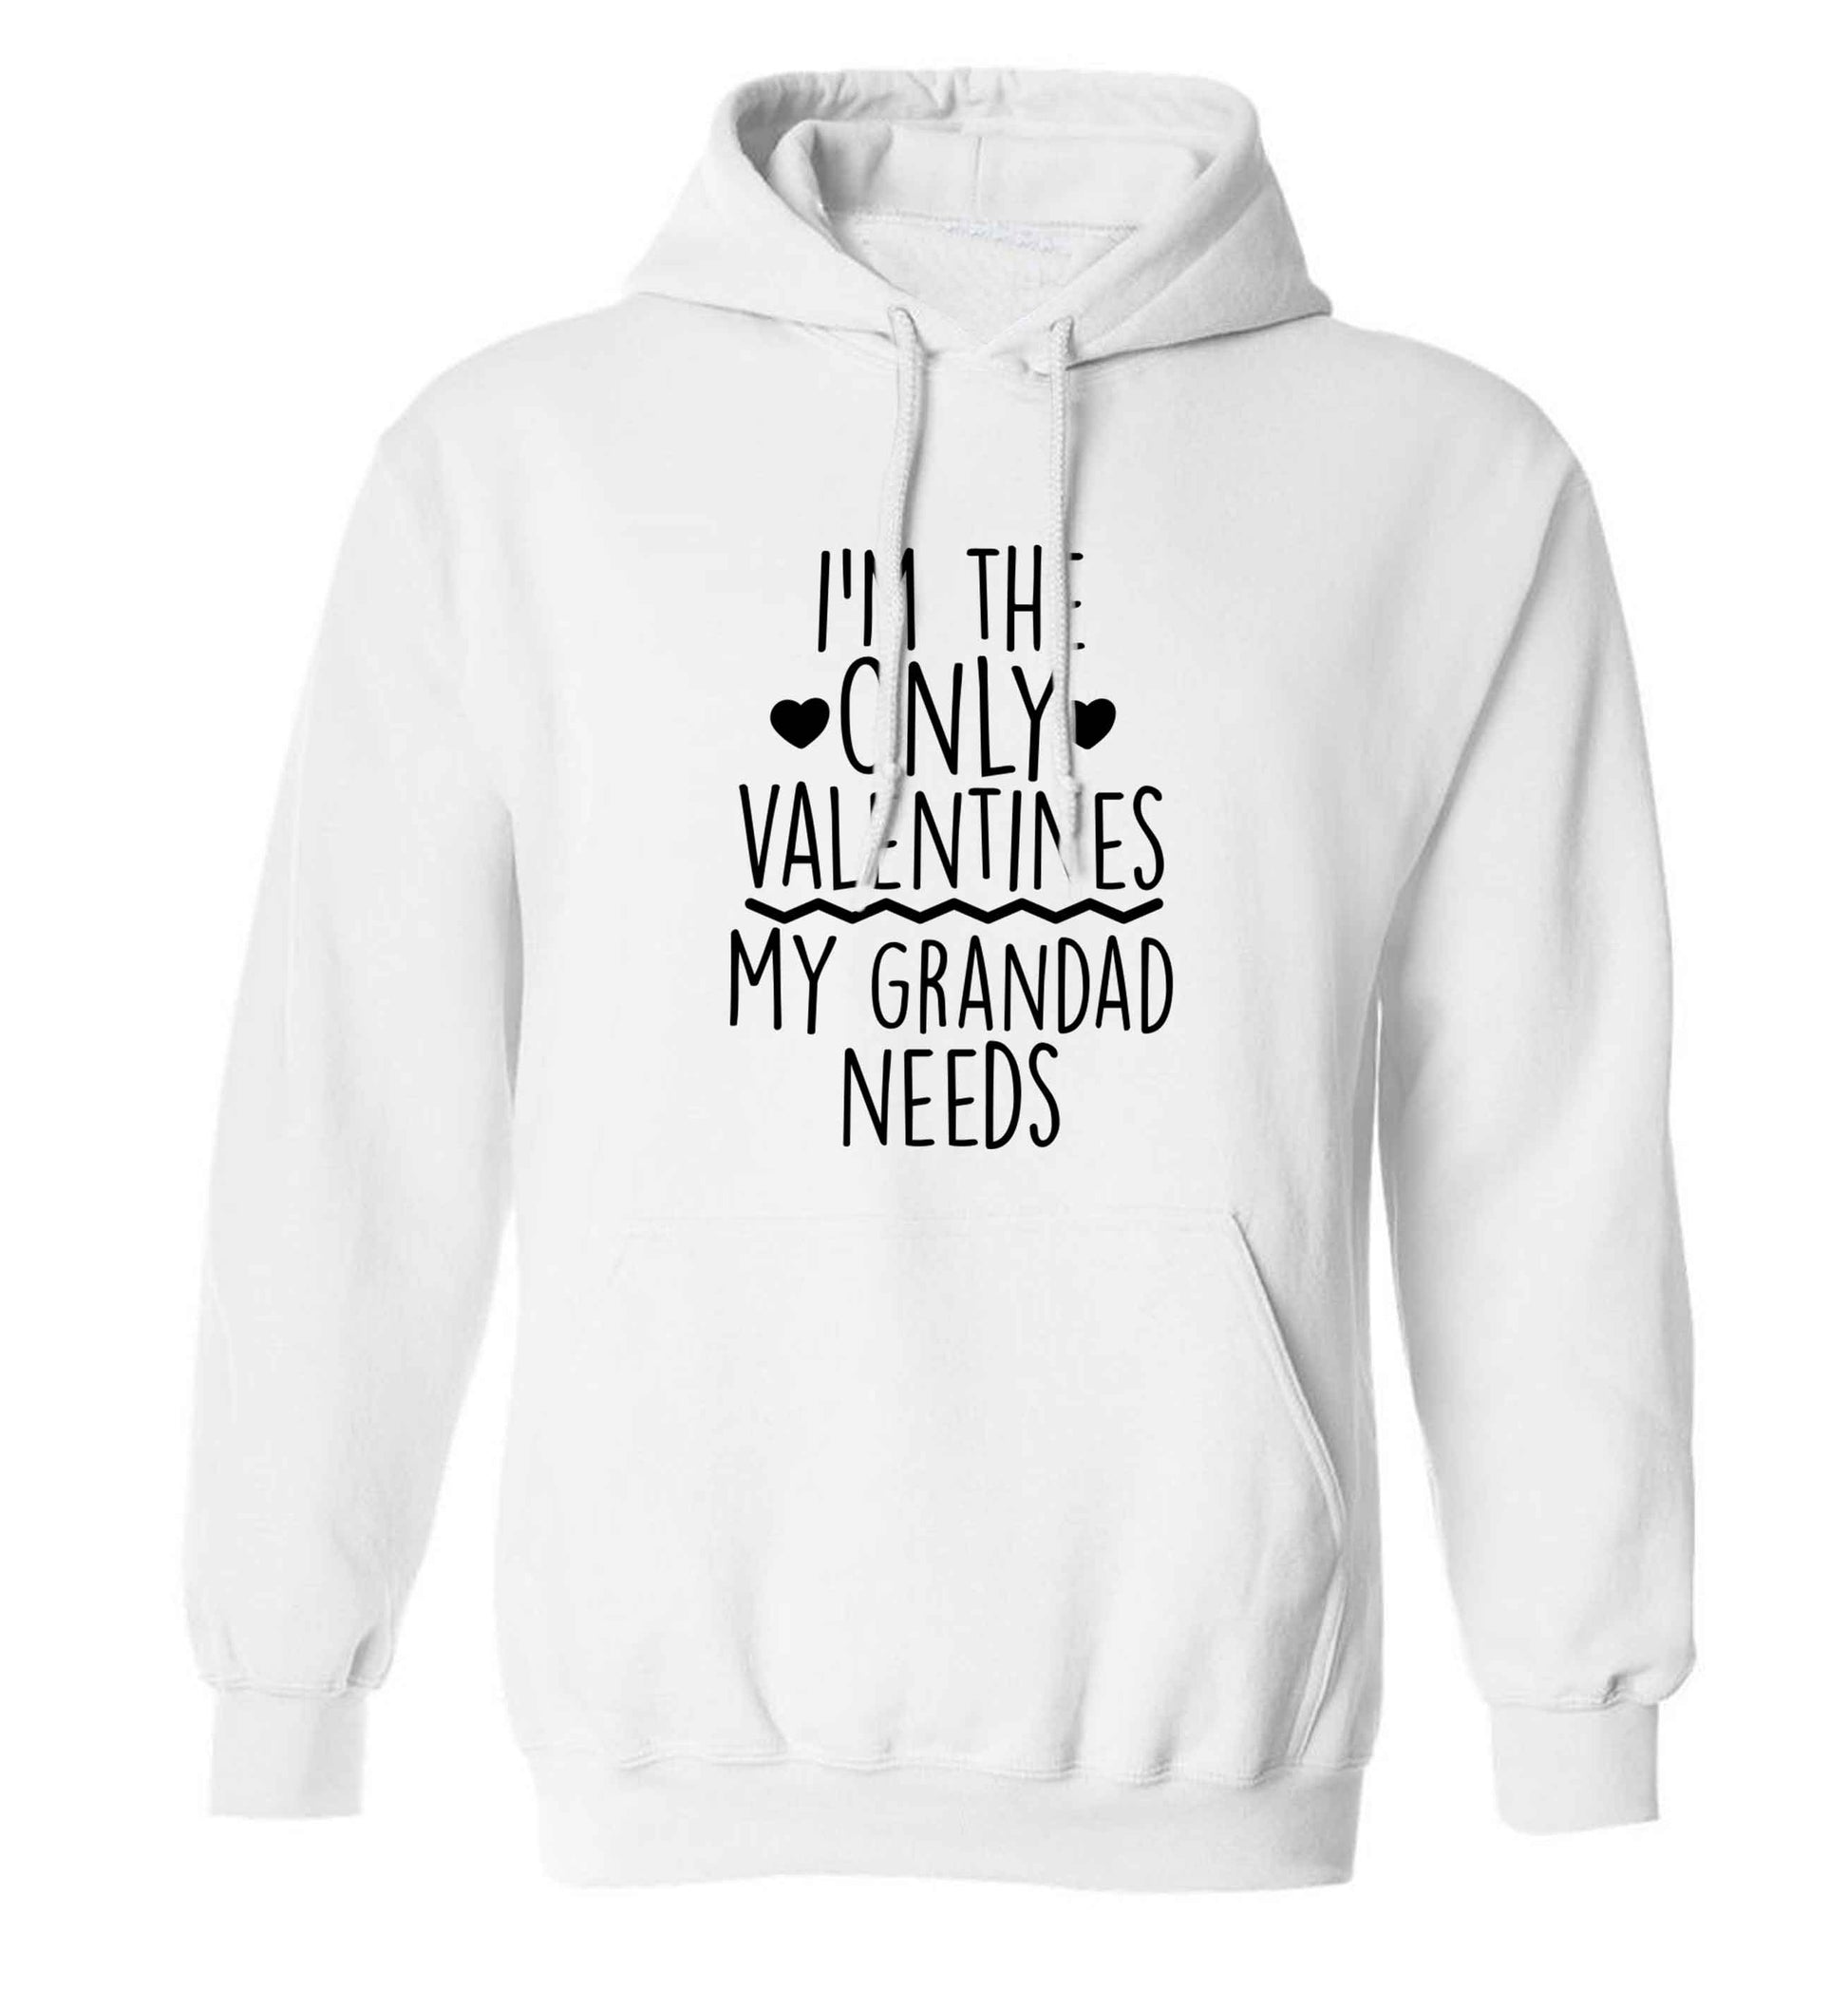 I'm the only valentines my grandad needs adults unisex white hoodie 2XL